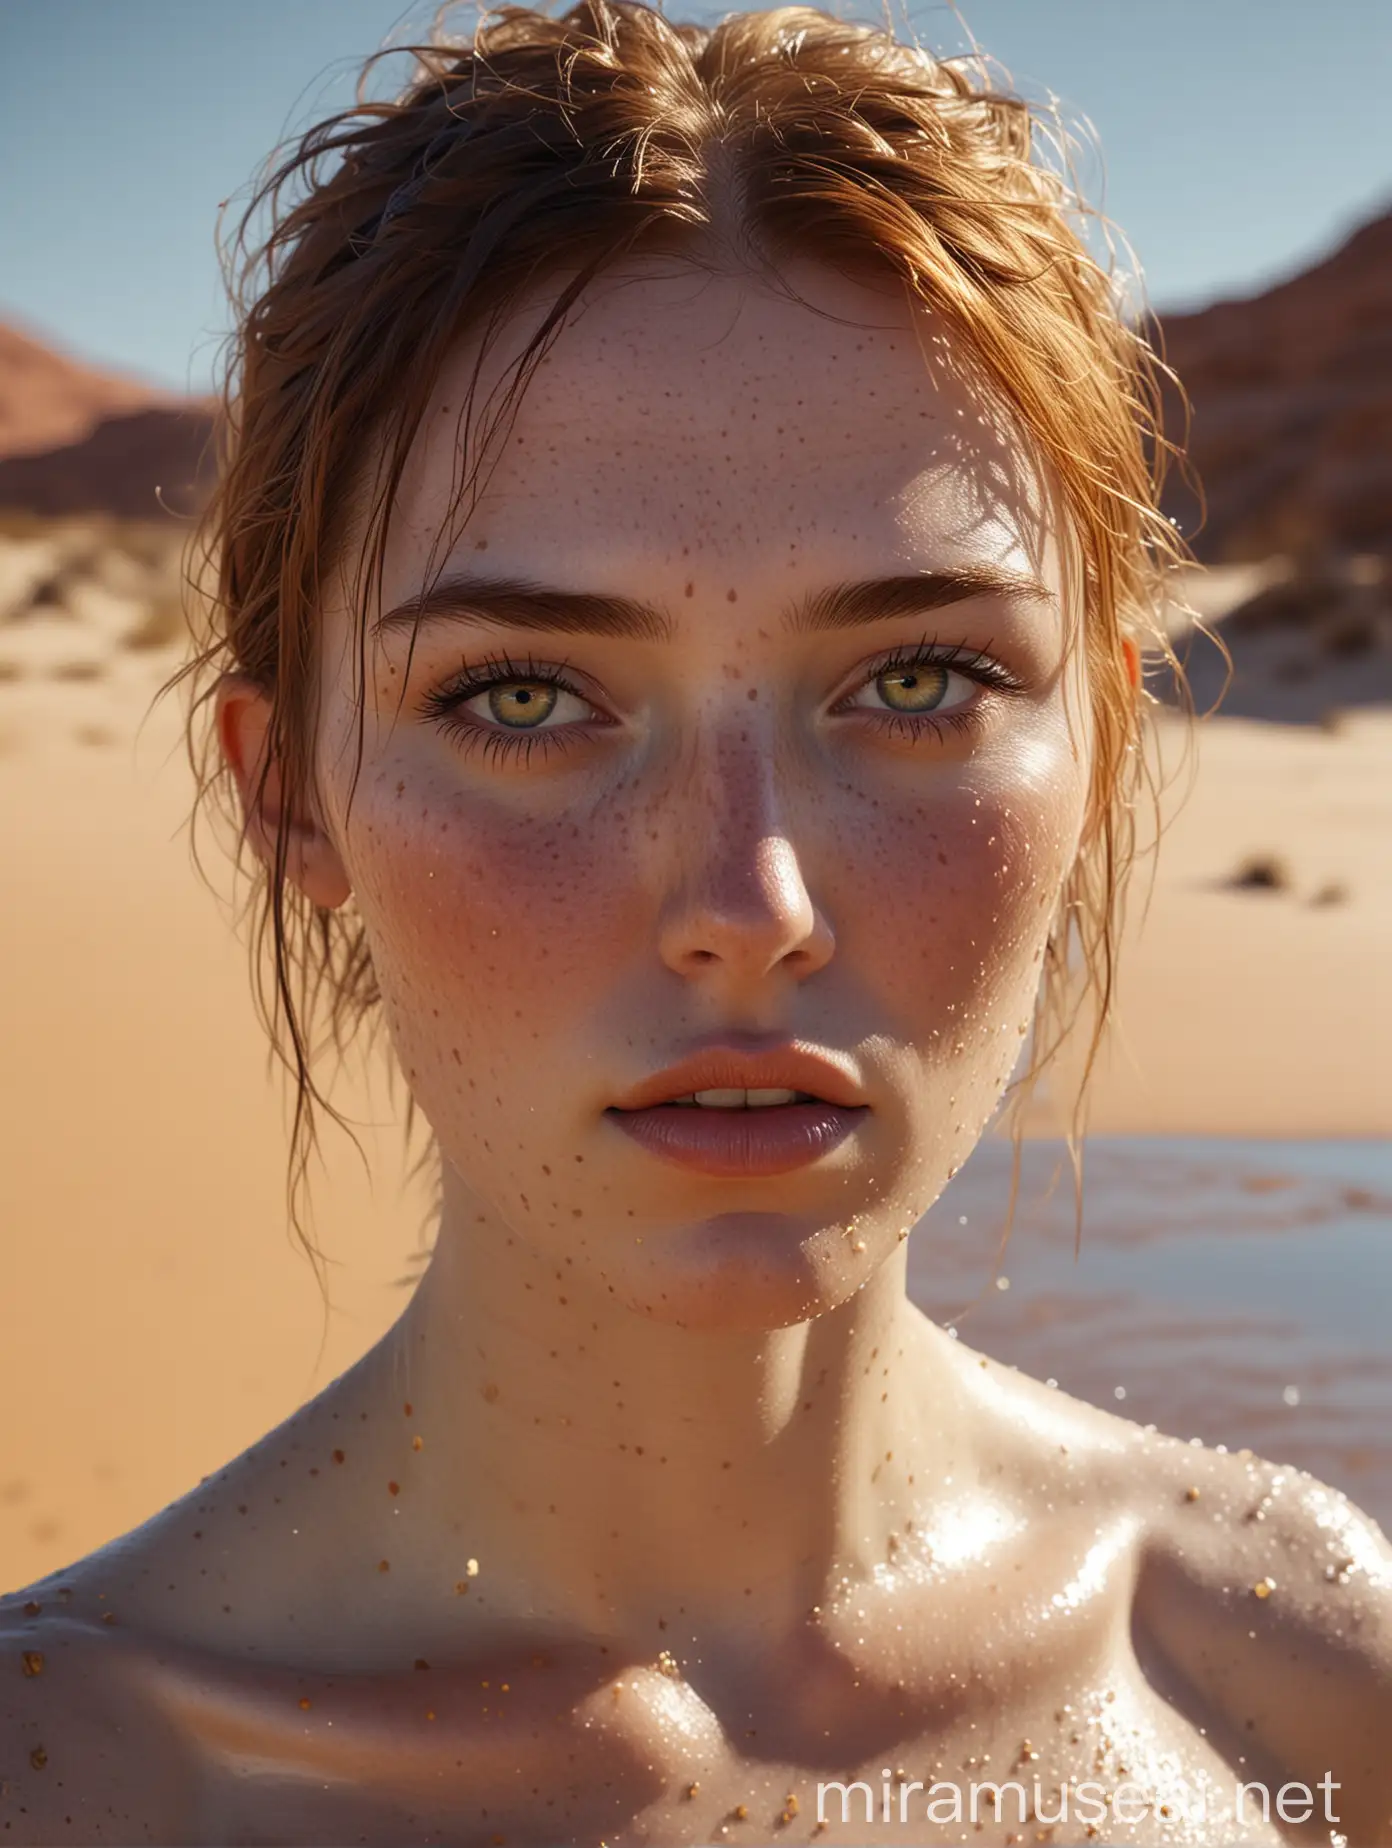 Freckled Pale Girl with Golden Spots in Cold Water Desert Oasis wearing DUNE Style Clothes